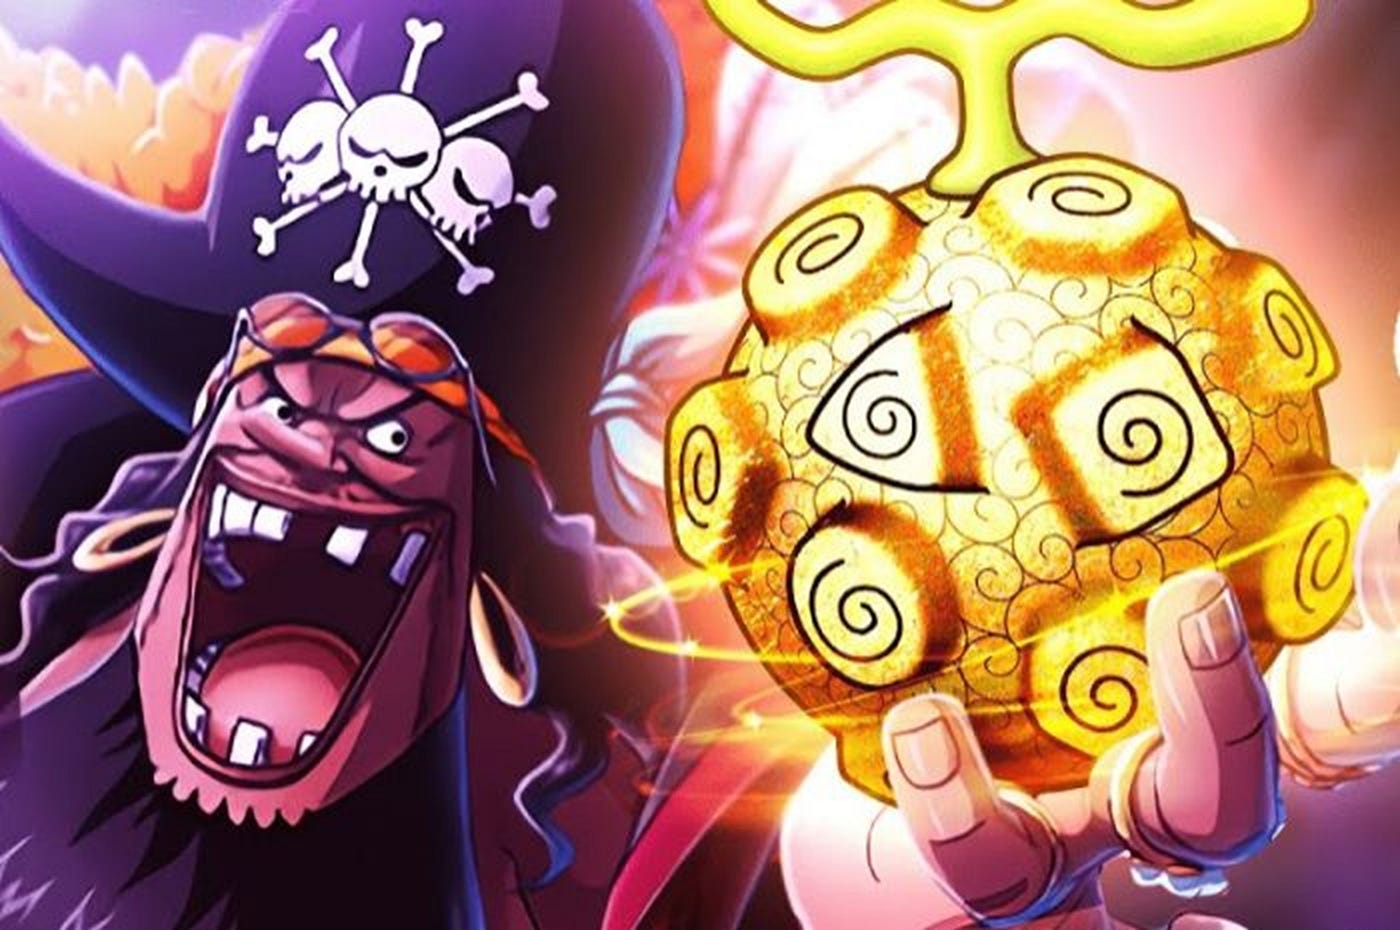 5 One Piece Mythical Zoan Devil Fruits (& The Powers They Grant)